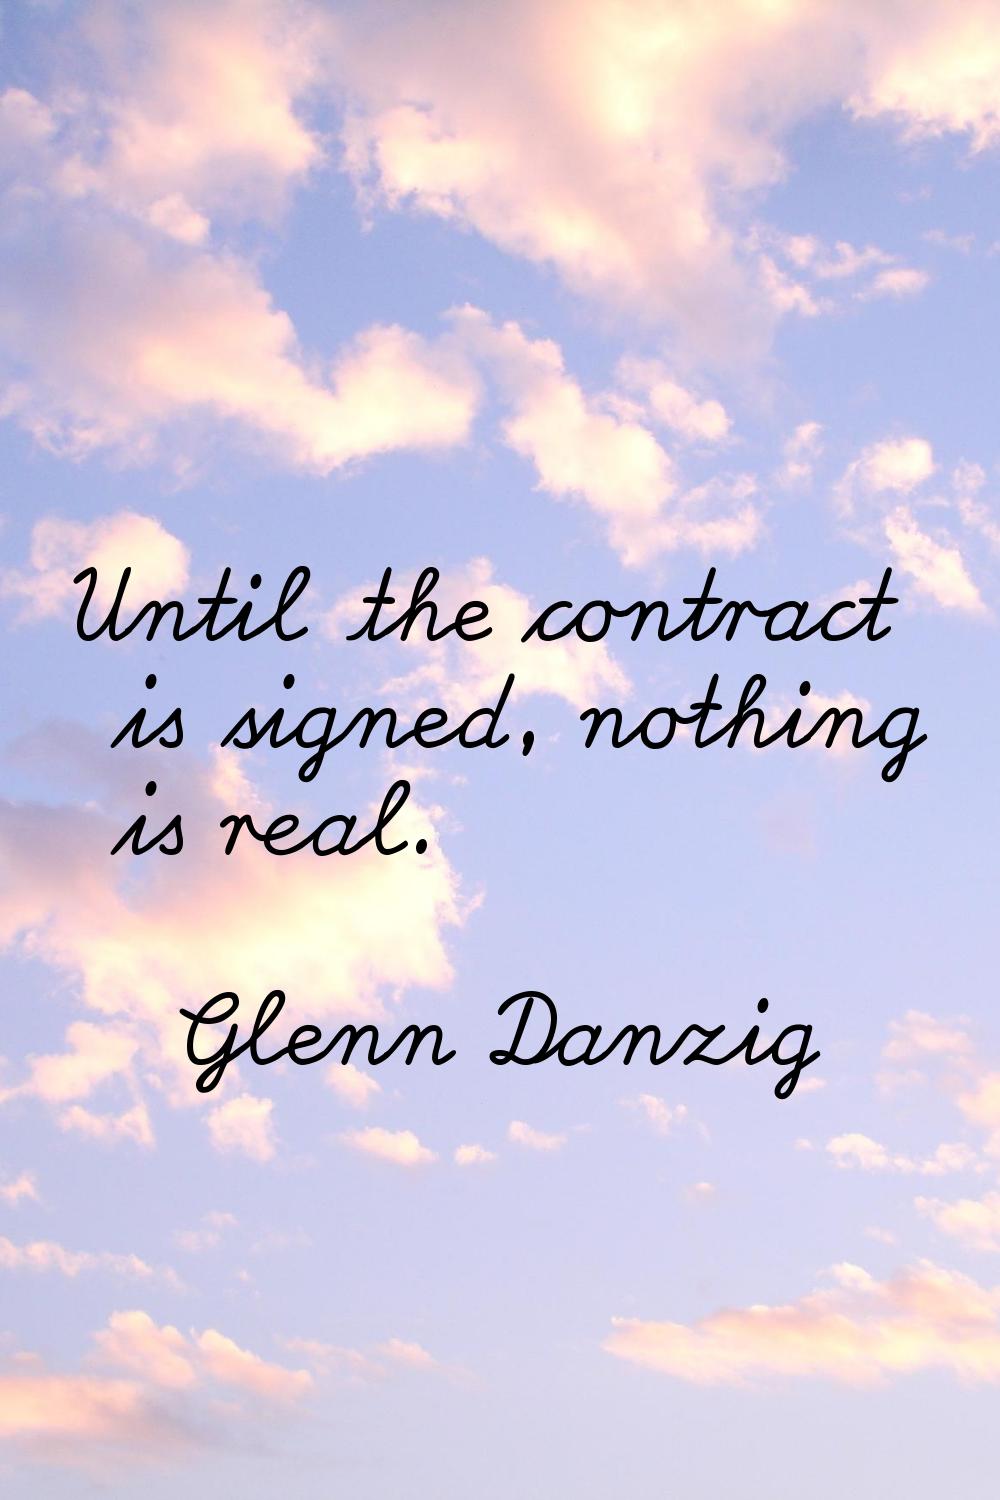 Until the contract is signed, nothing is real.